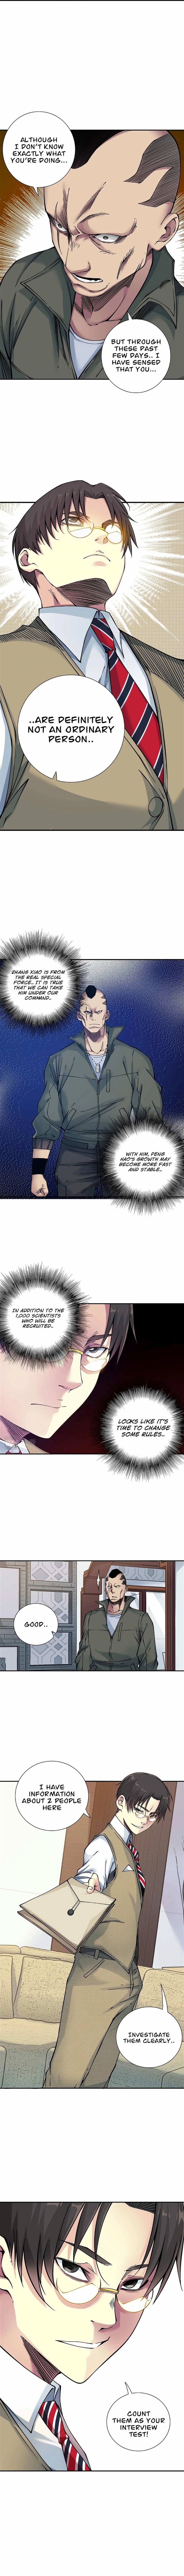 Eternal Club Chapter 34 page 7